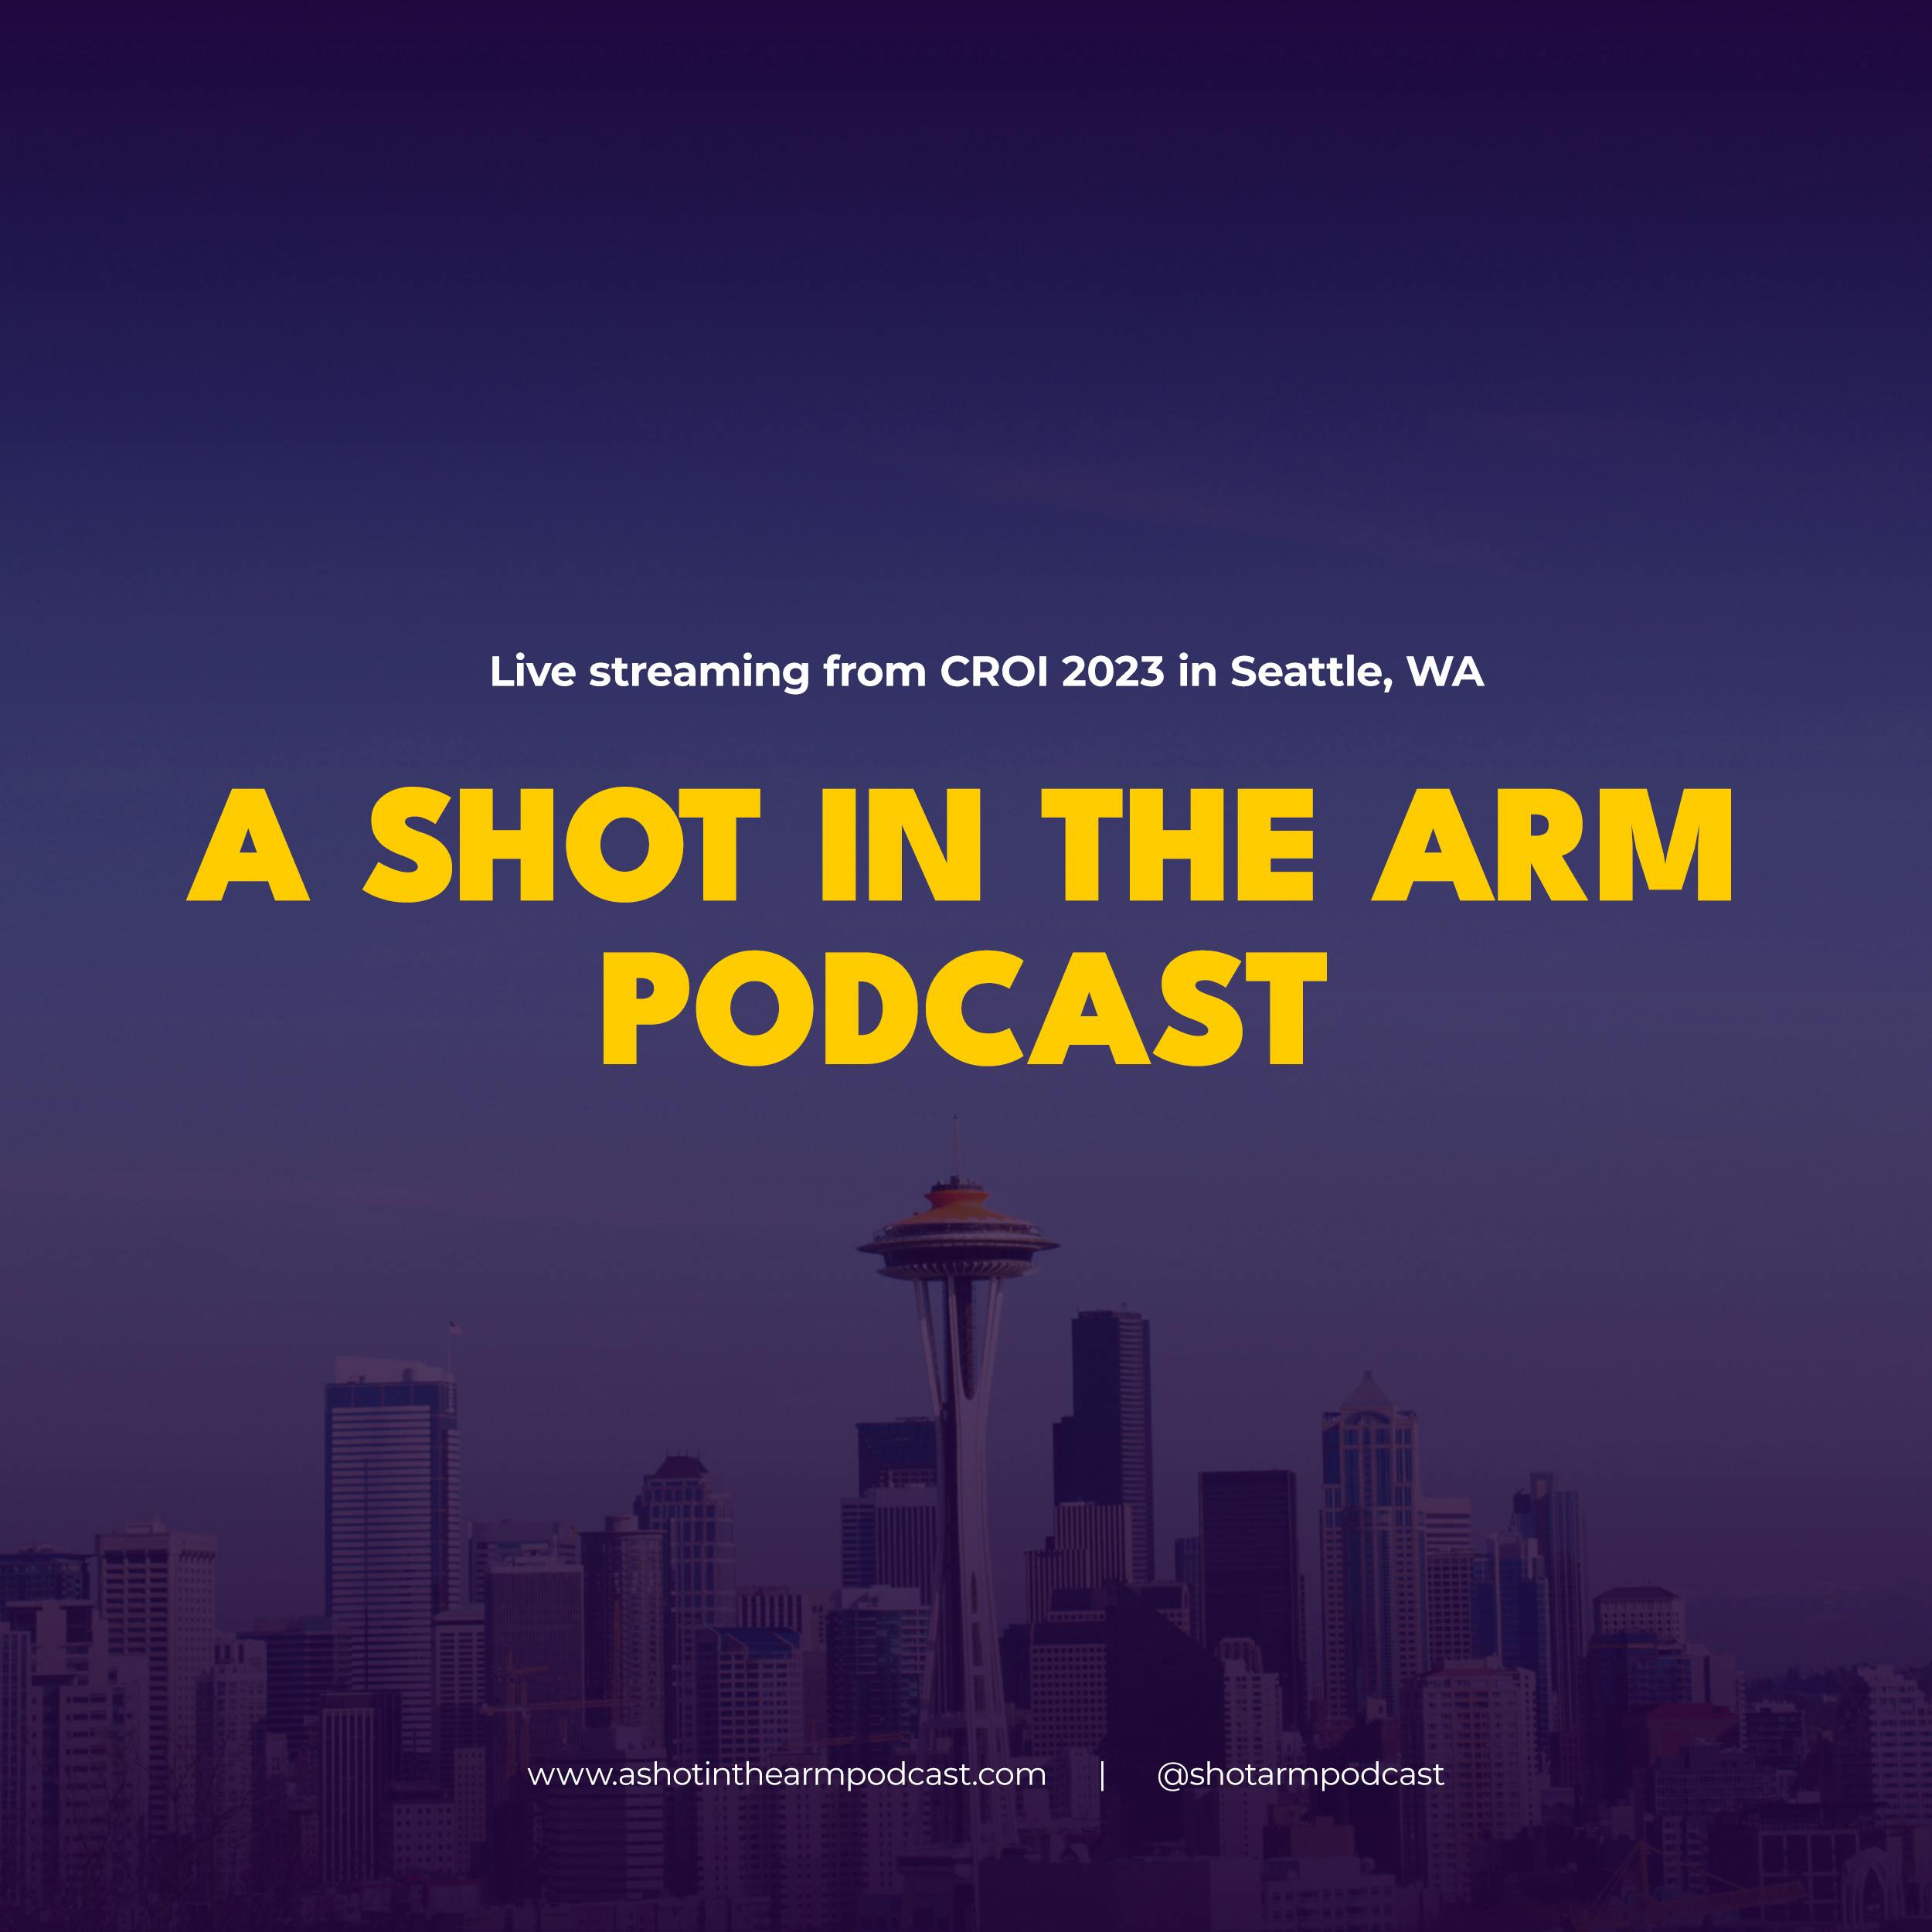 A Shot In the Arm Podcast: Live From CROI 2023!